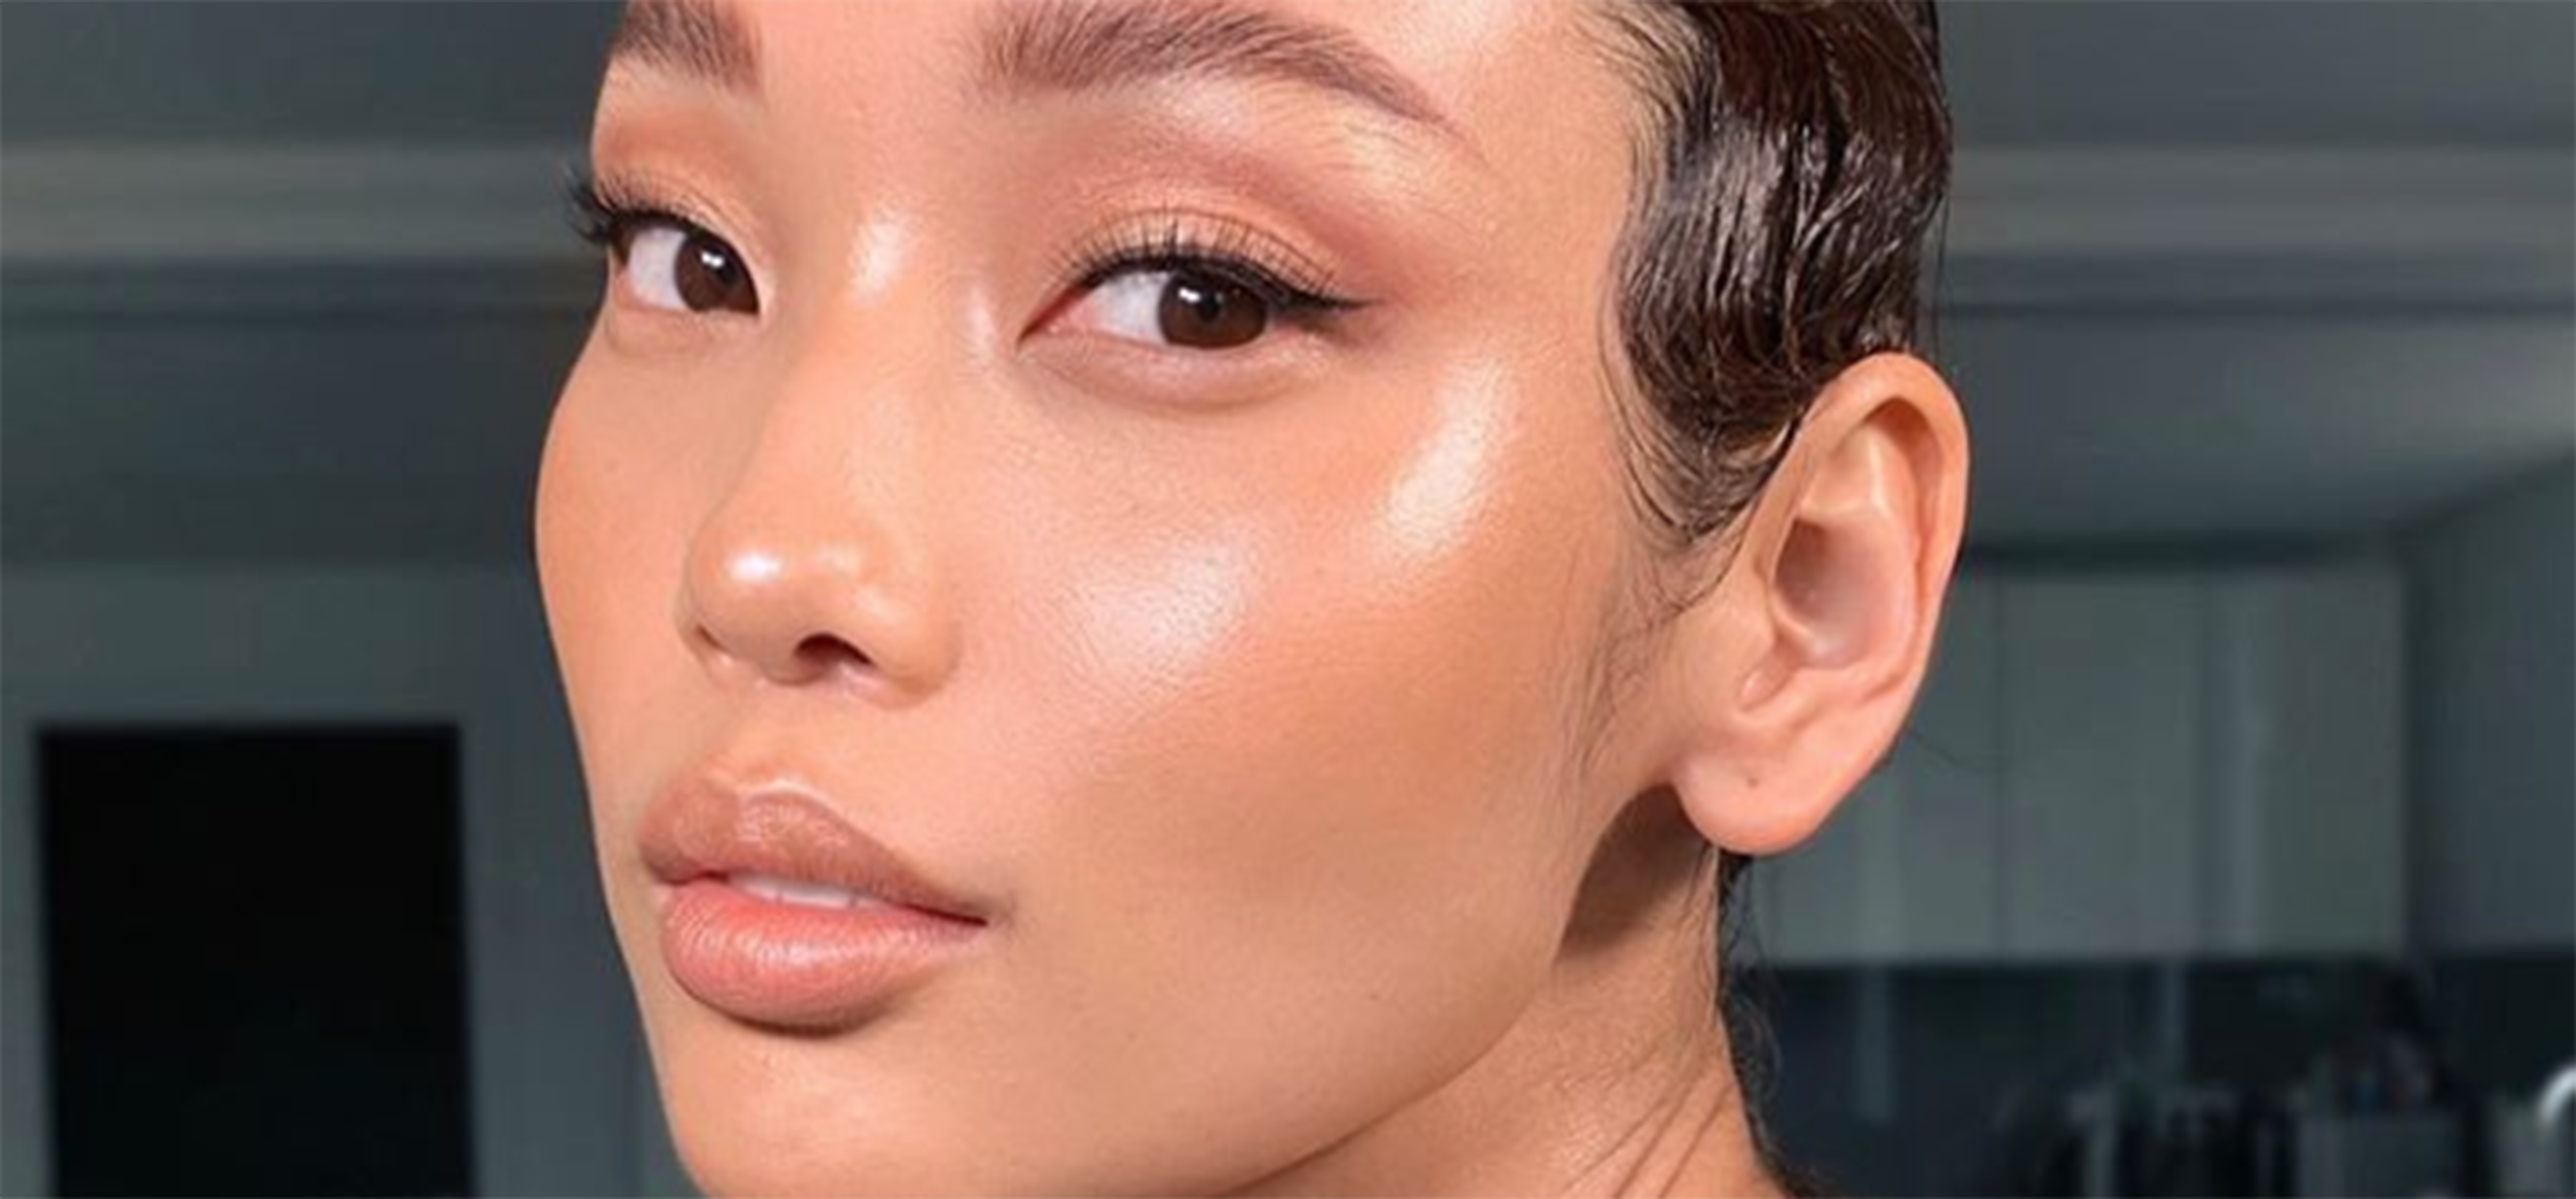 best highlighter for glowing skin